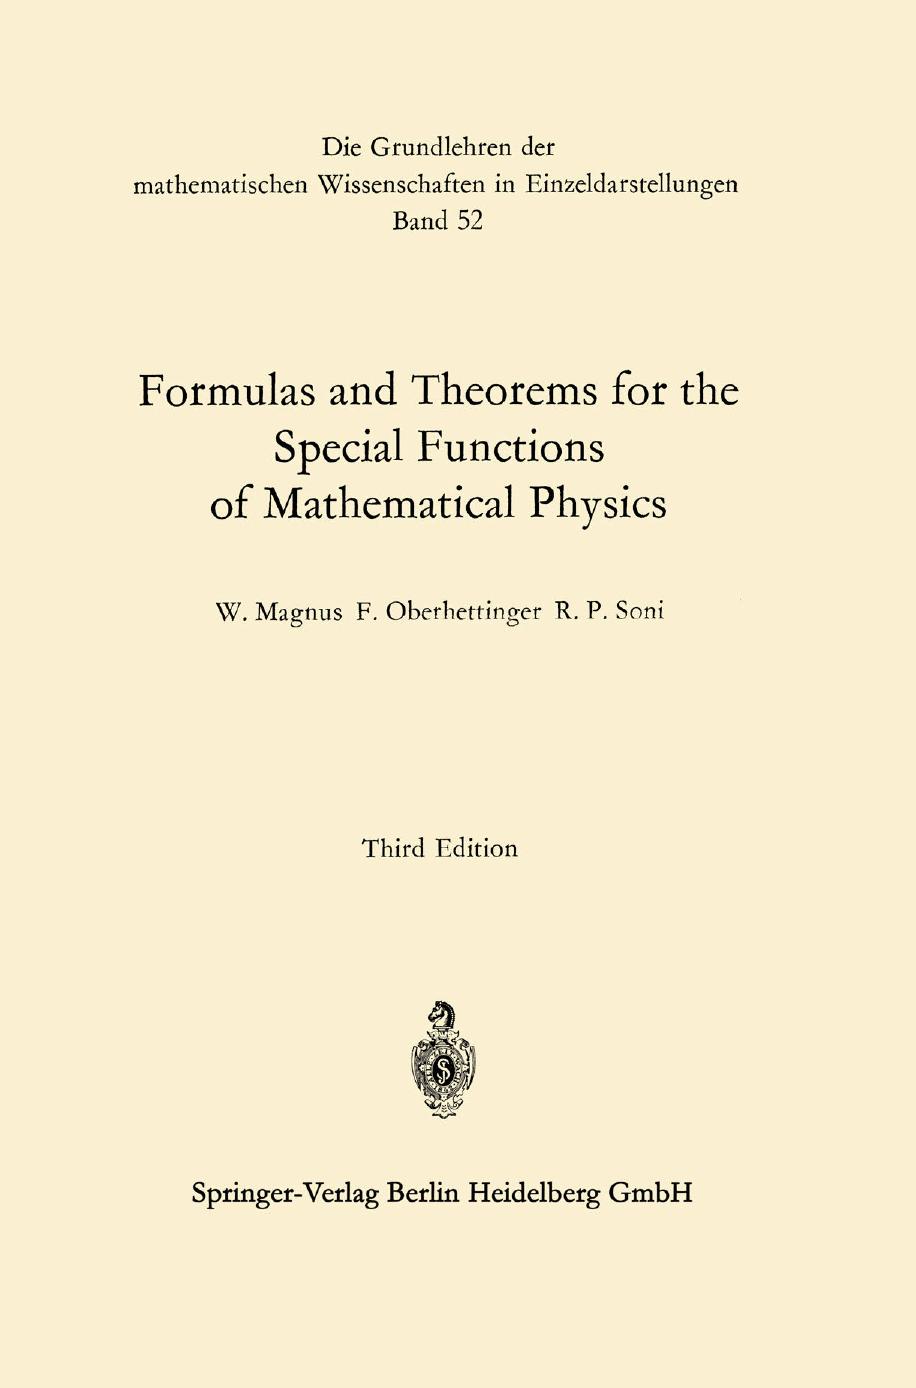 Formulas and Theorems for the Special Functions of Mathematical Physics